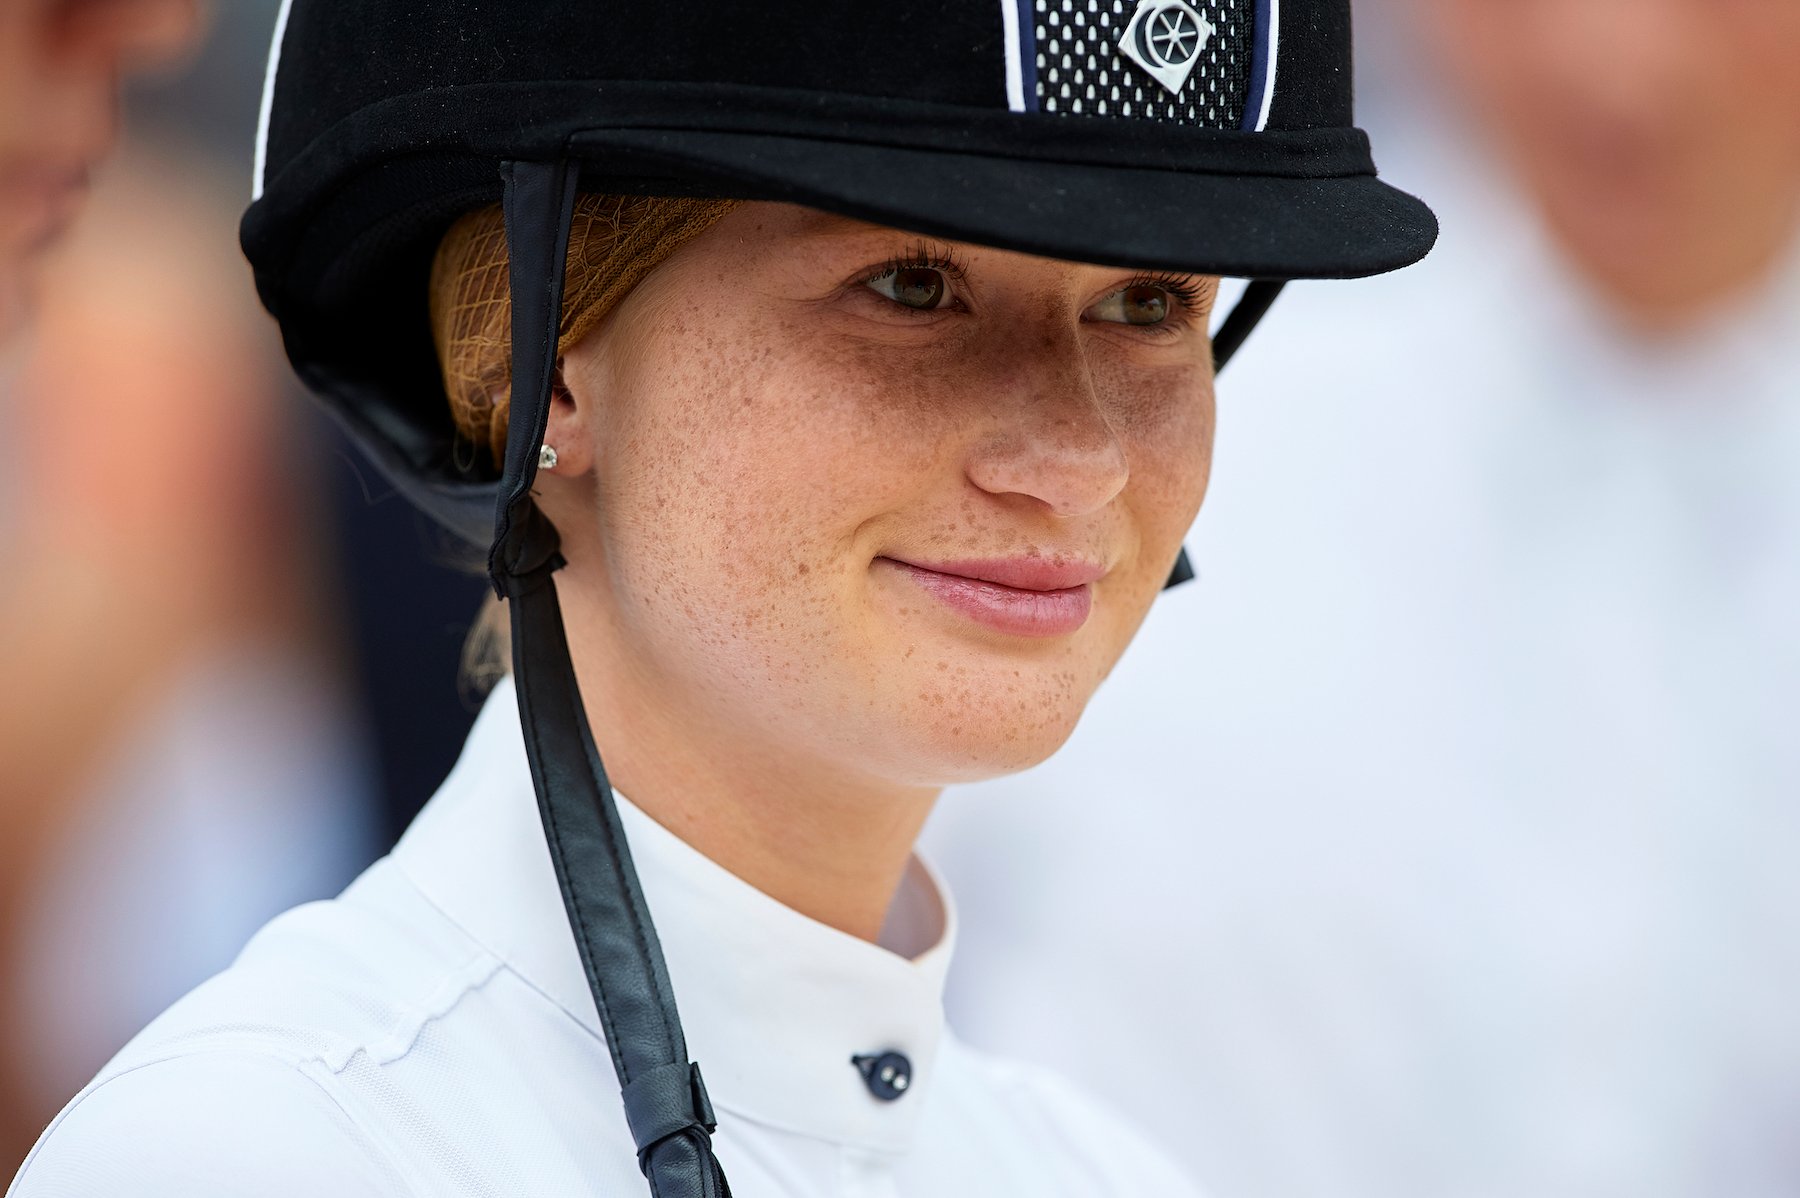 Jennifer Katharine Gates, Bill Gates' daughter, wearing a helmet and a white shirt at the Global Champions Tour of Monaco 201